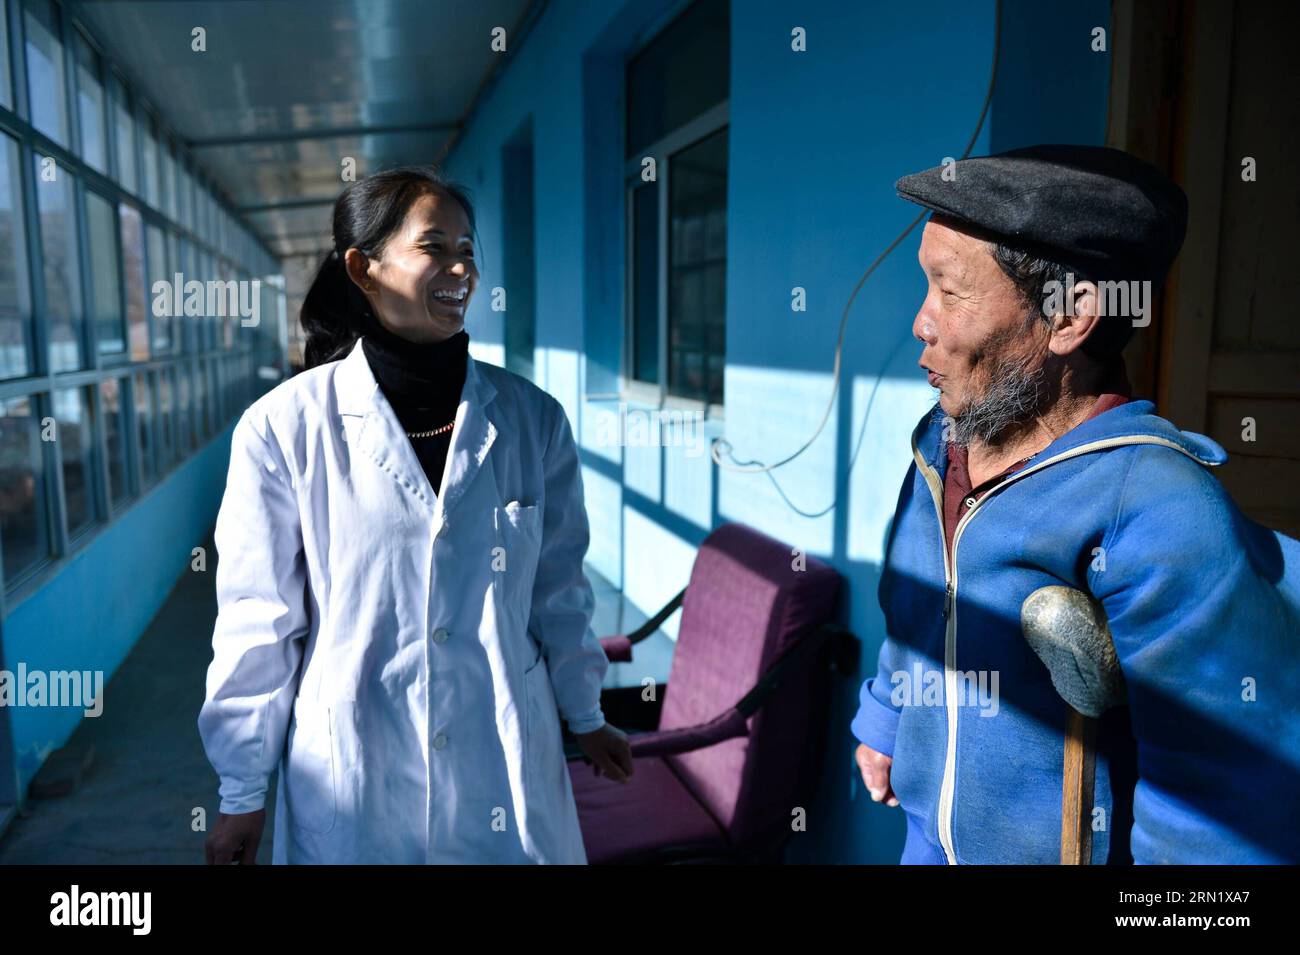 (150124) -- XINING, Jan. 21, 2015 -- Zhang Qingyun (L), a nurse at Tongren chronic disease control and prevention hospital, talks with patient Wen Changtai at the hospital in Tongren County, Huangnan Tibetan Autonomous Prefecture, northwest China s Qinghai Province, Jan. 21, 2015. The Tongren chronic disease control and prevention hospital is the only professional leprosary in Qinghai, where leprosy, also known as Hansen s disease, used to be prevalent before the founding of the country. Now the disease has been effectively controlled, and the incidence rate has decreased significantly. The 62 Stock Photo